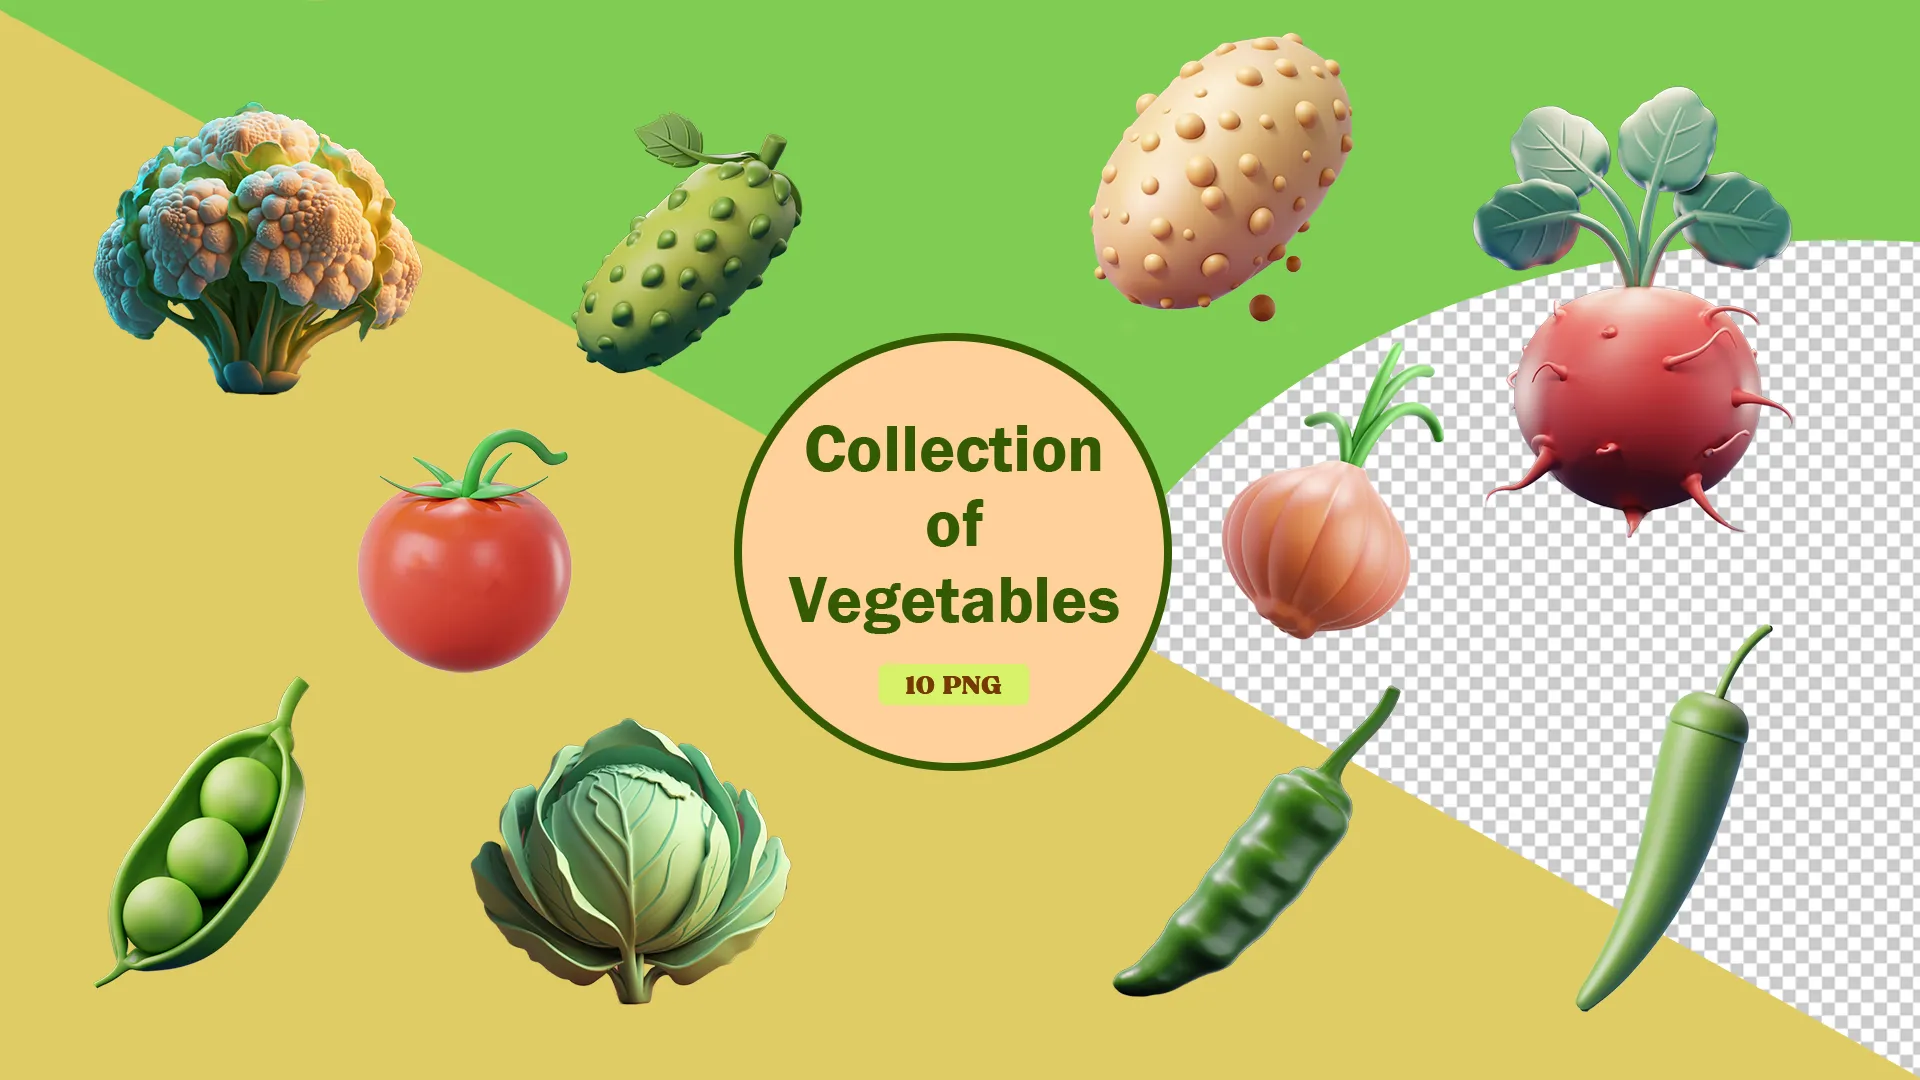 Healthy Eating Cartoon Vegetable Collection image